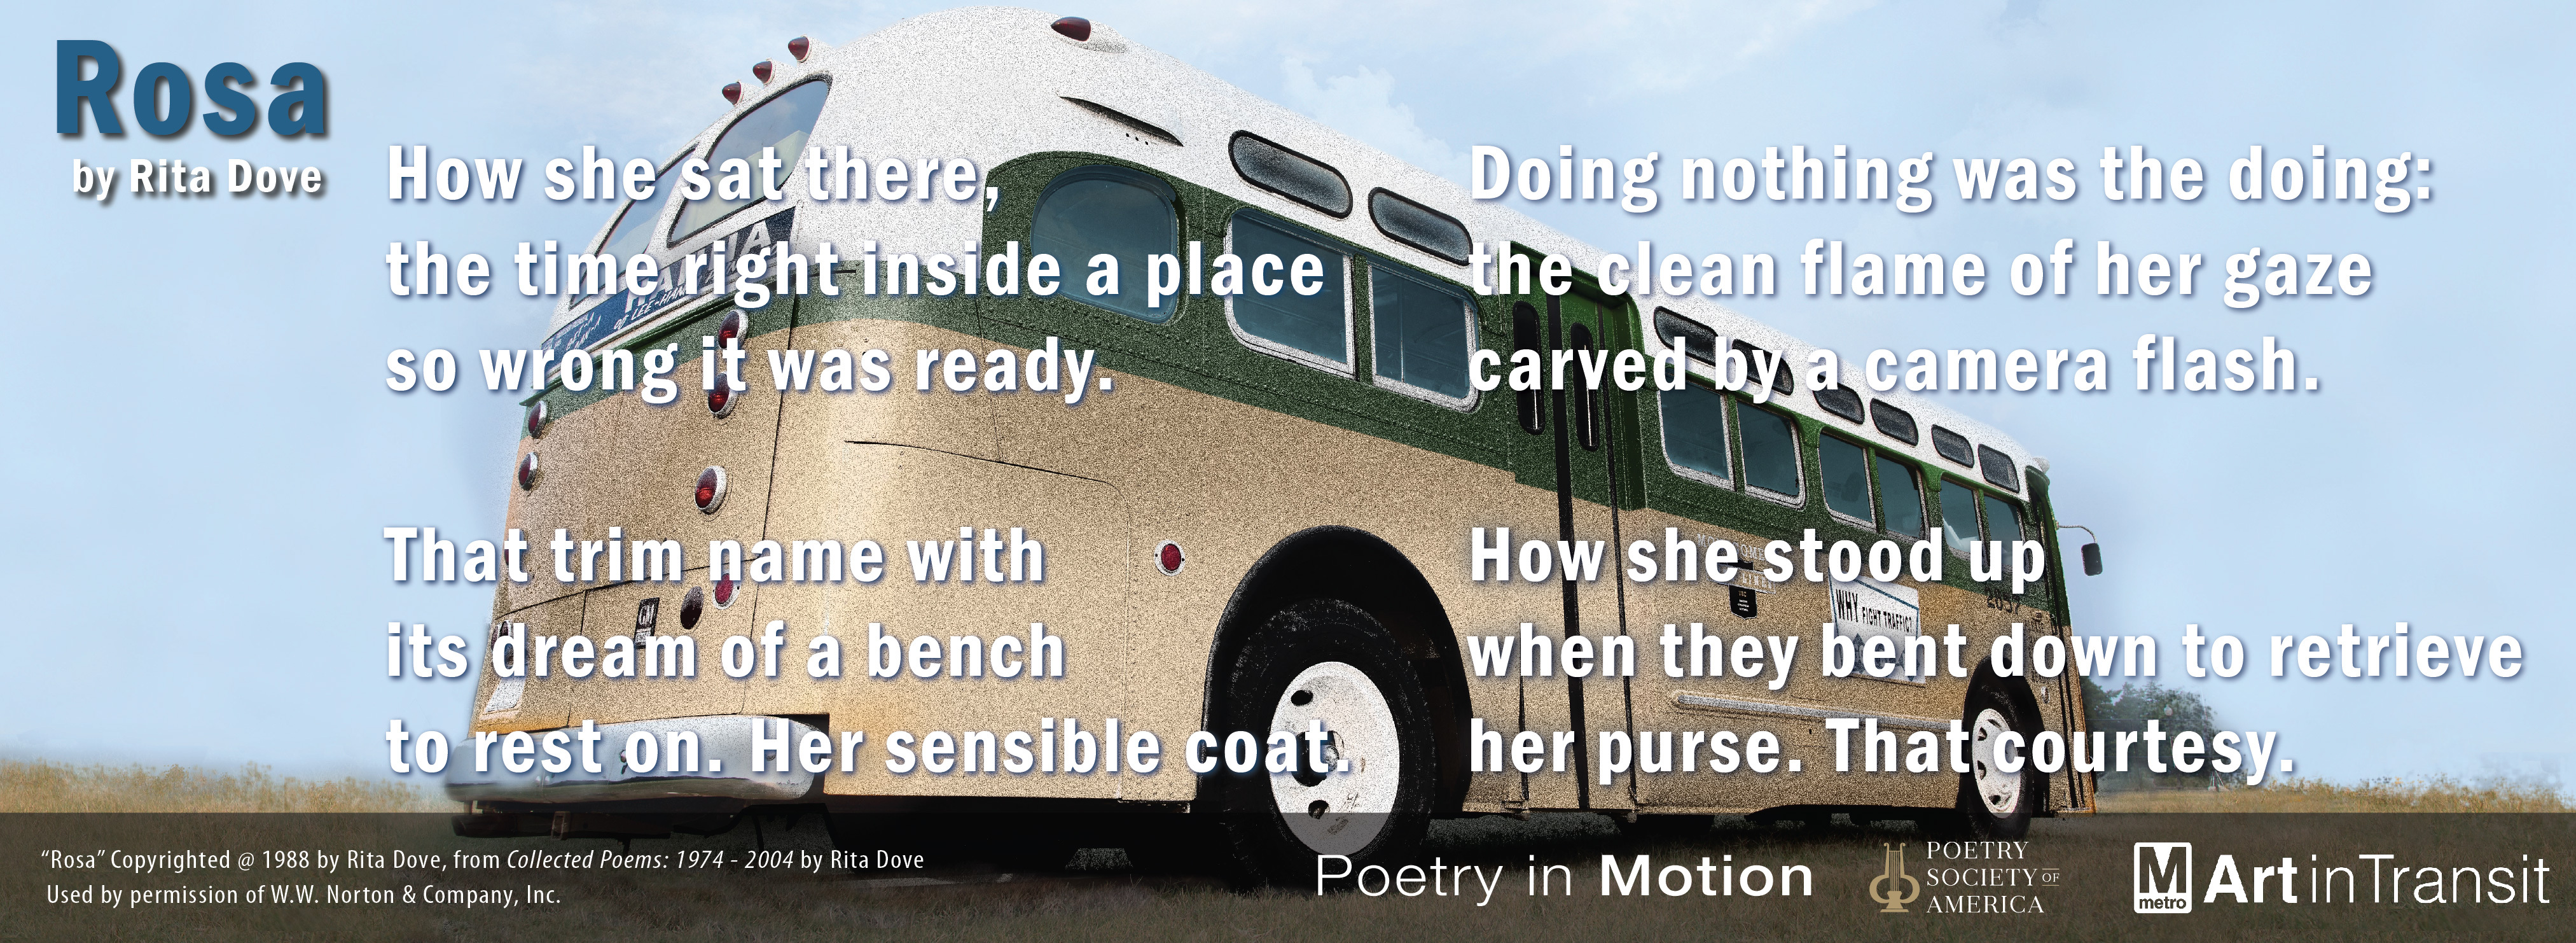 A vertical poster features a gold, green and white bus on a clear-sky day. The poster contains the poem Rosa, by Rita Dove written in white text.